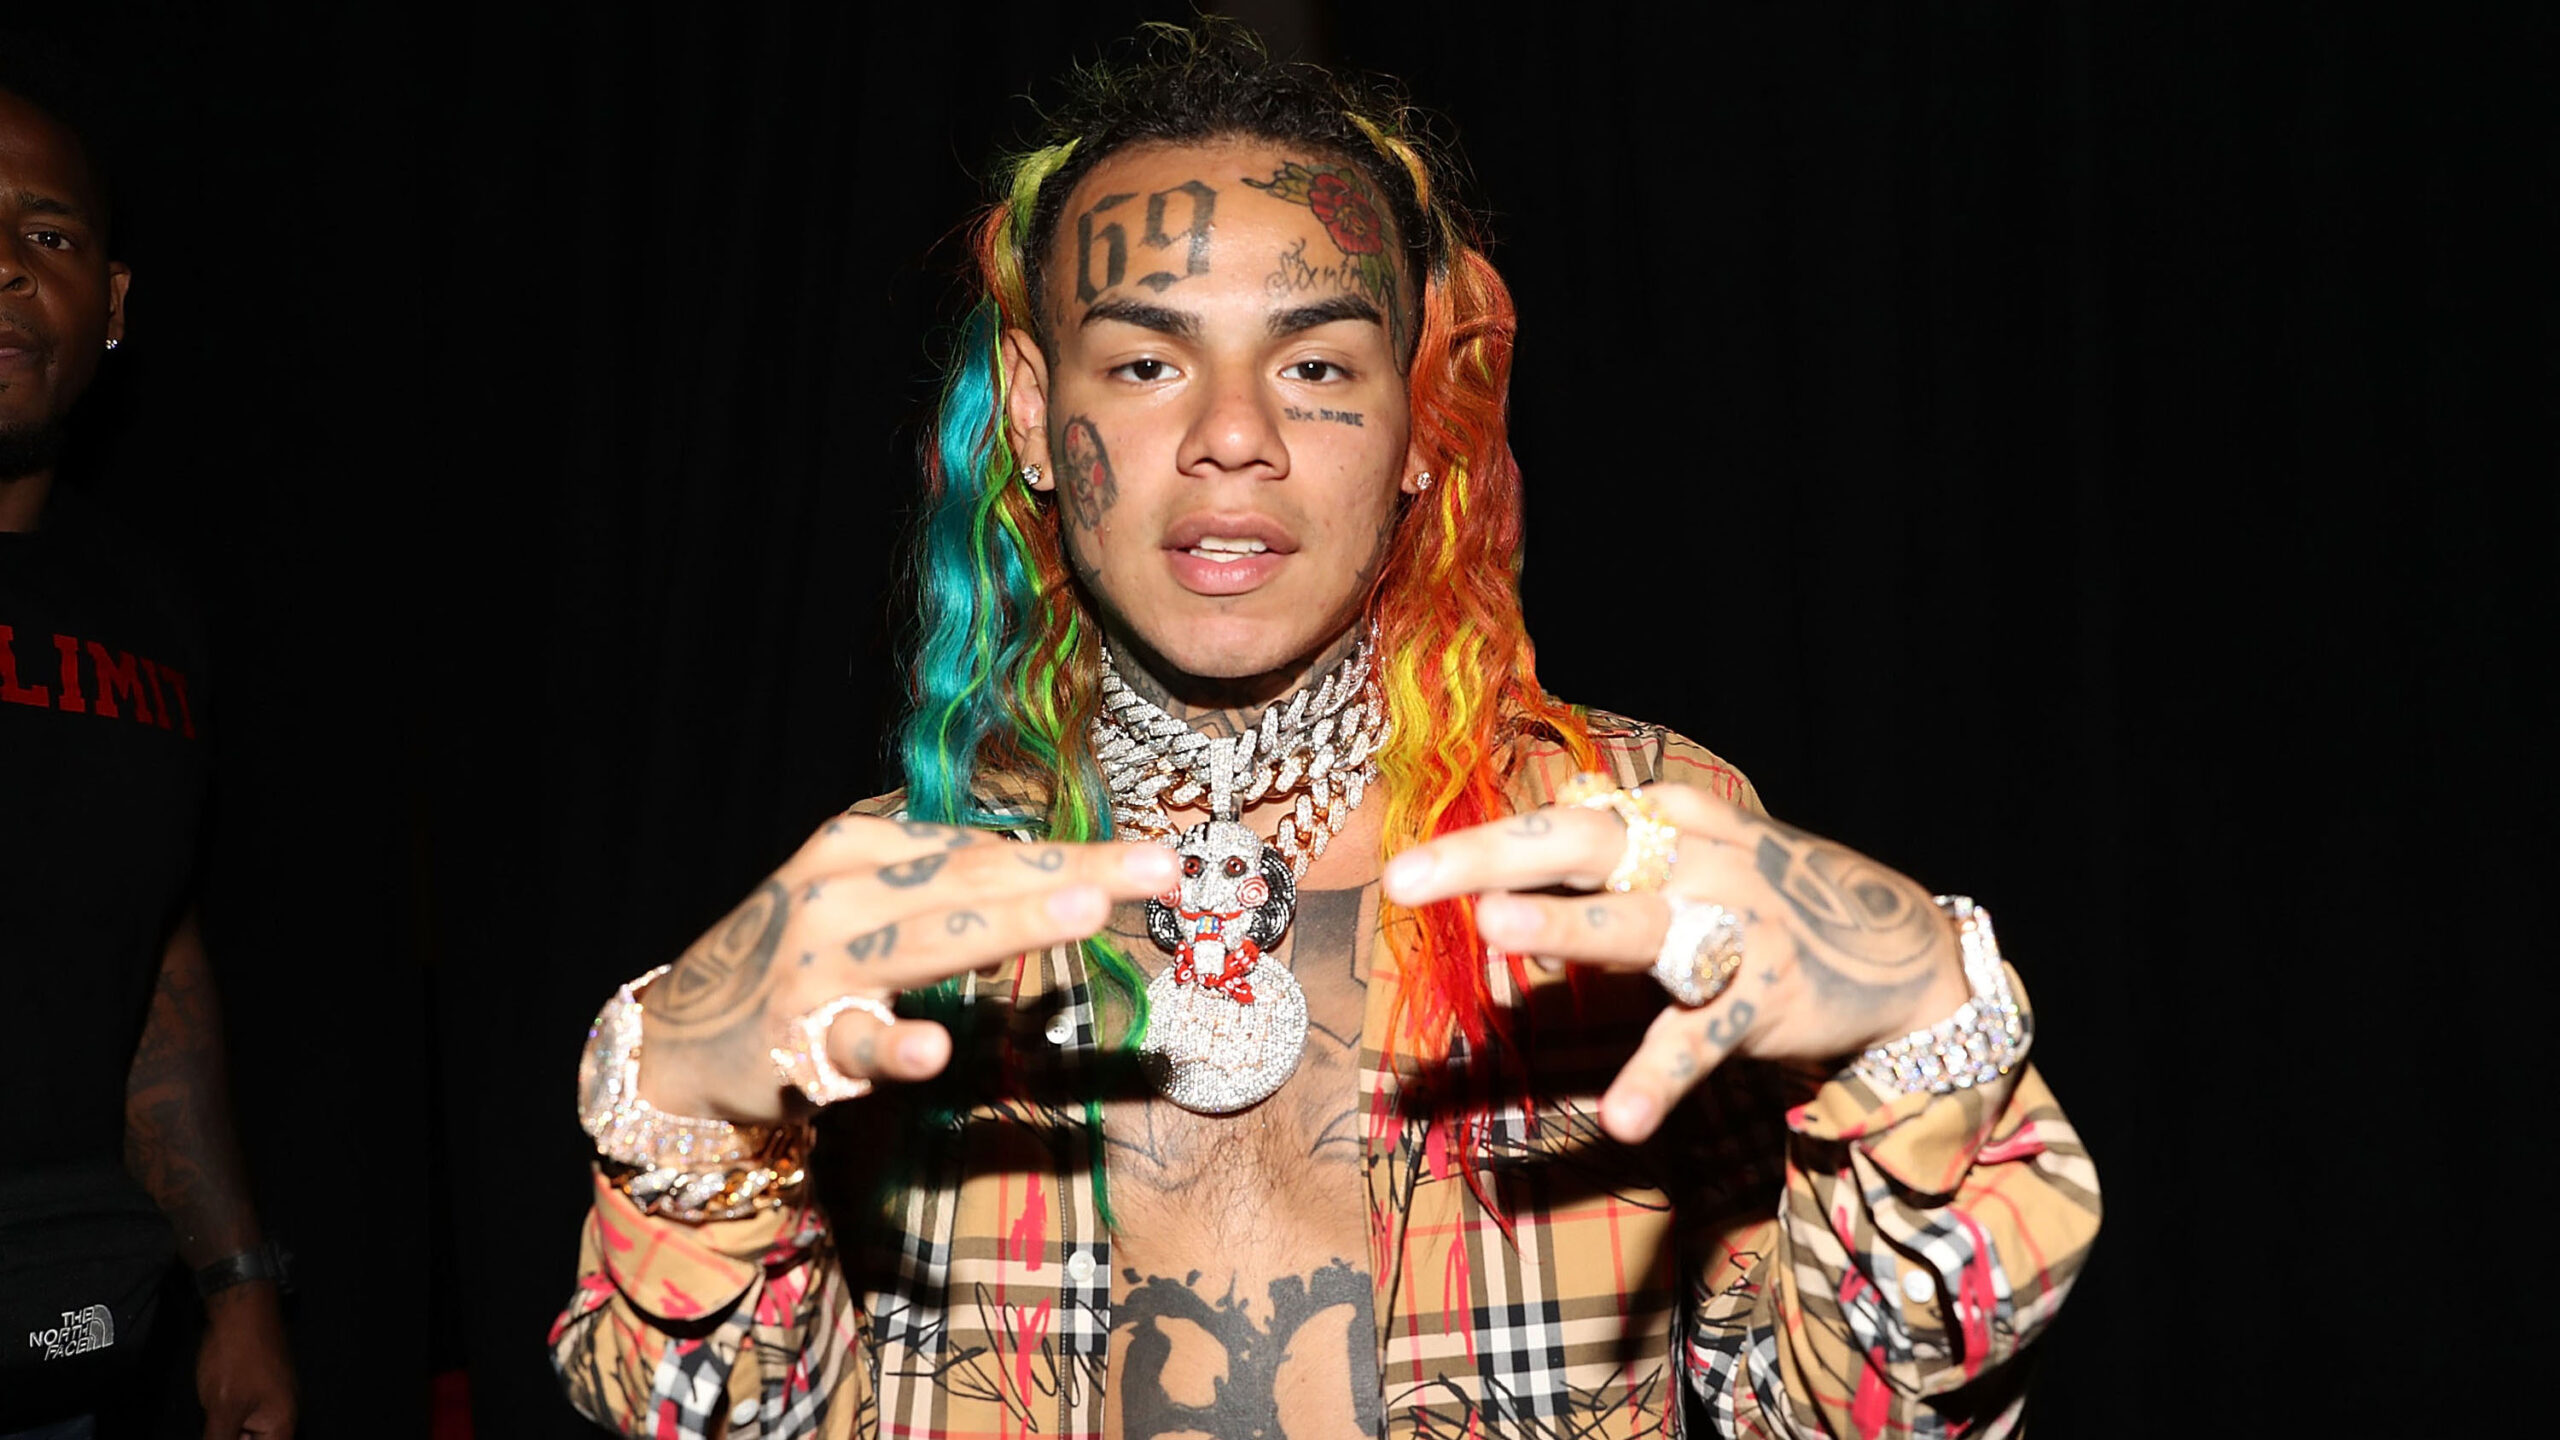 Video Shows Moments Leading Up To Alleged Assailants Attacking Rapper Tekashi 6ix9ine In Gym